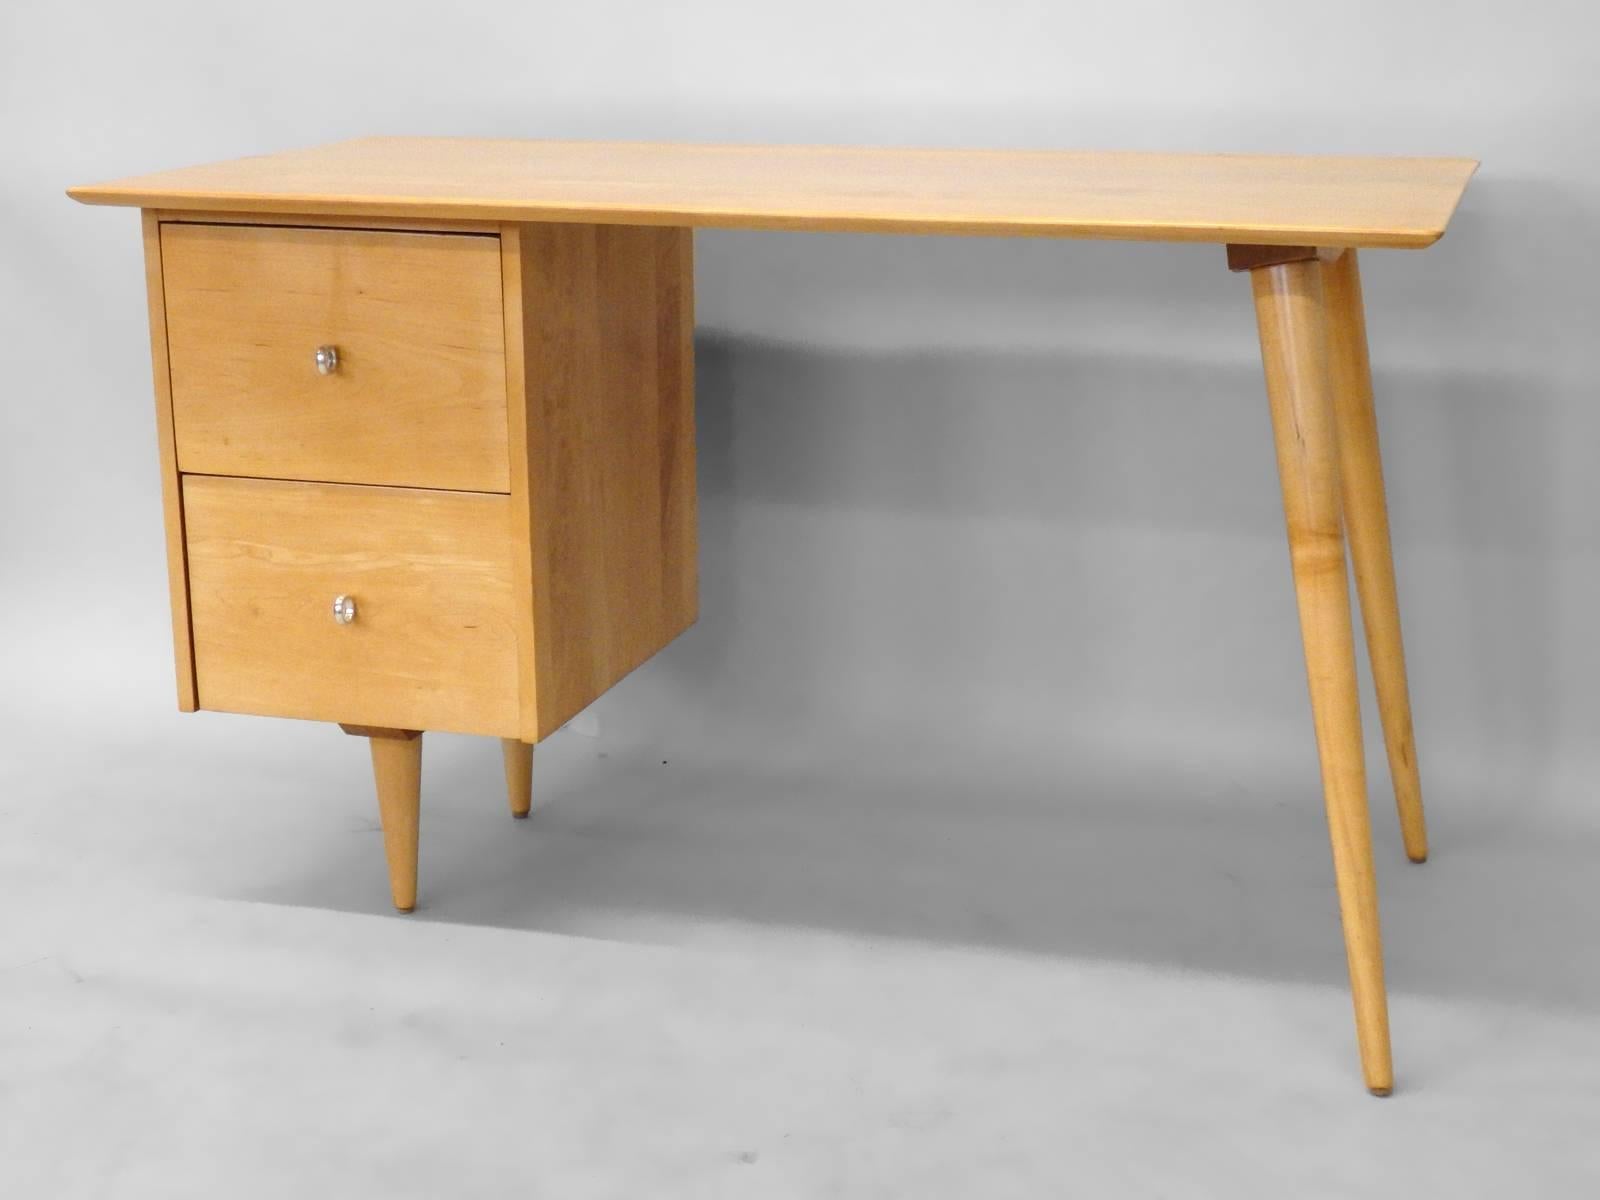 Desk by Paul McCobb for Winchedon.